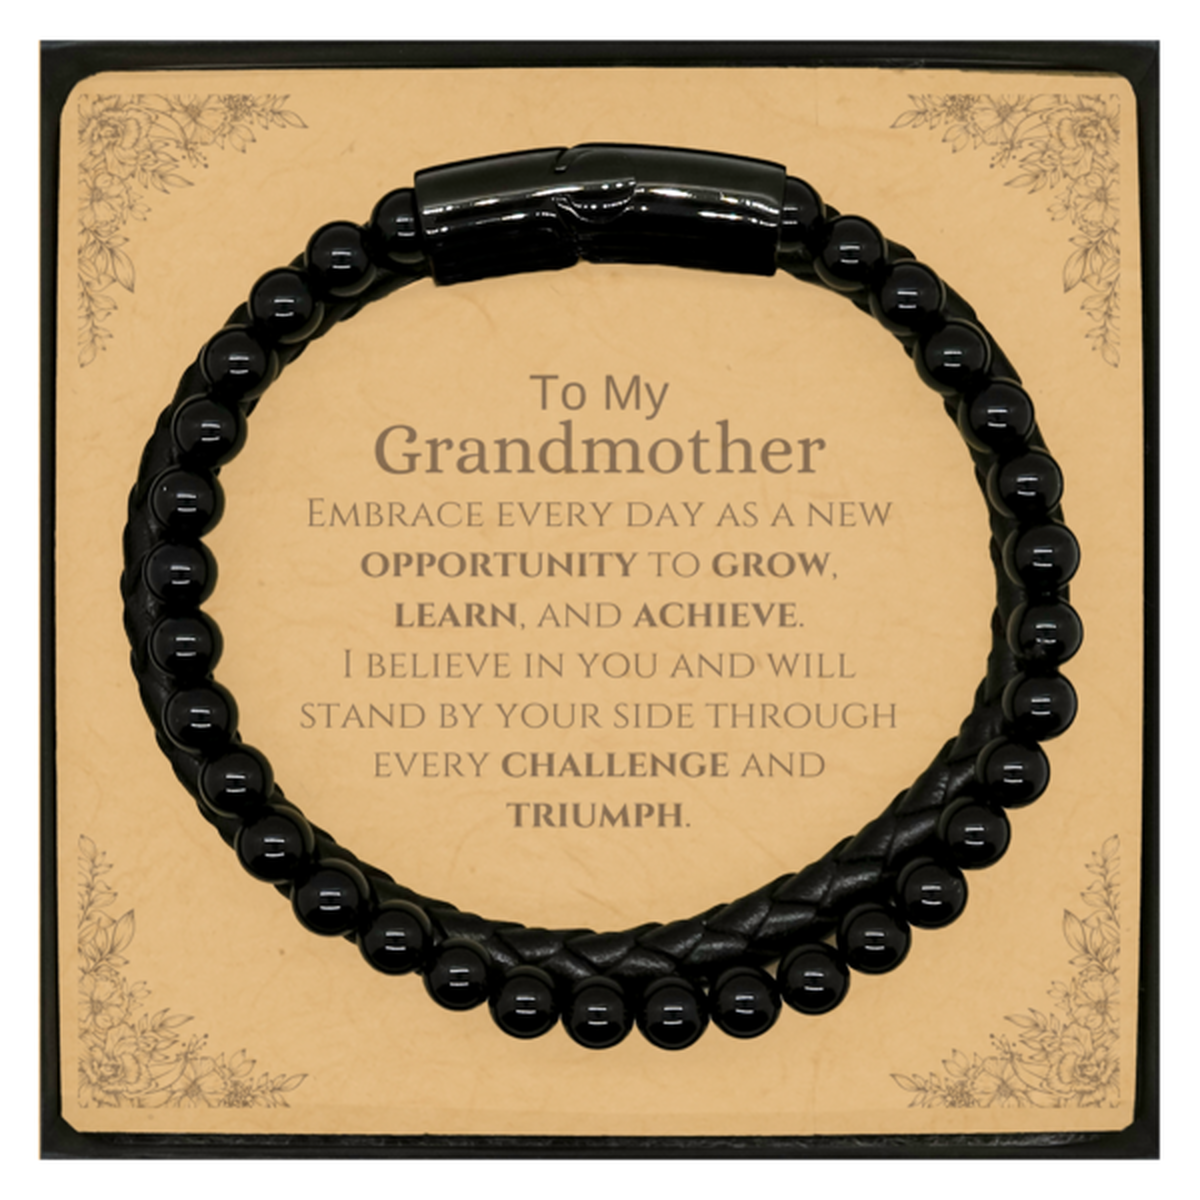 To My Grandmother Gifts, I believe in you and will stand by your side, Inspirational Stone Leather Bracelets For Grandmother, Birthday Christmas Motivational Grandmother Gifts